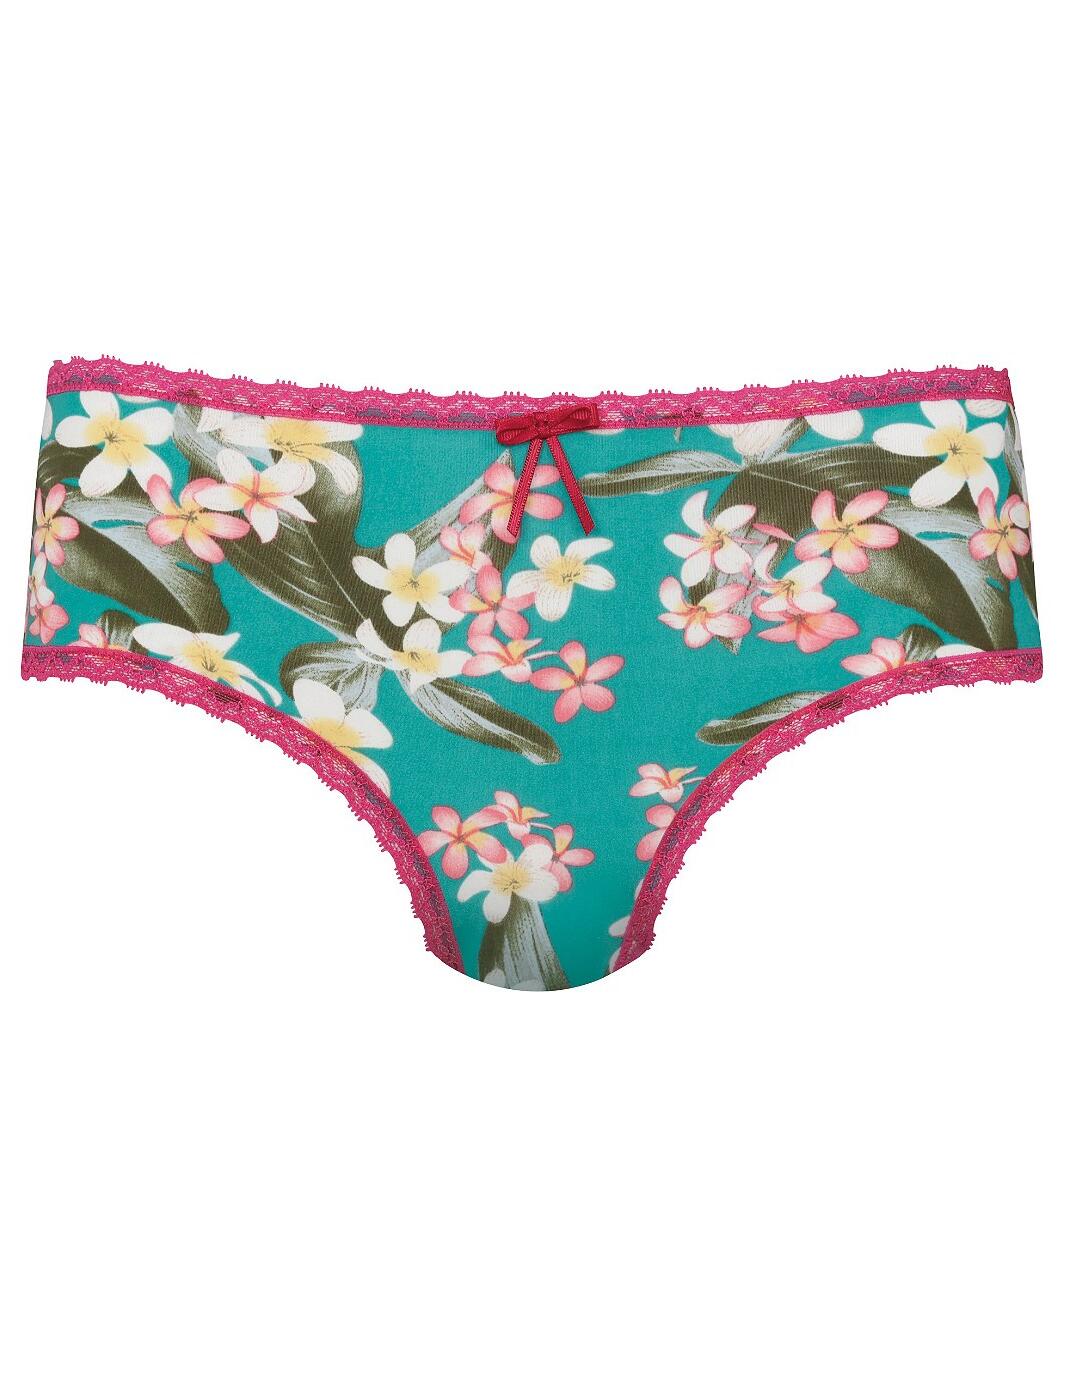 110059 Cybele by Naturana Shorty Brief - 110059 Floral Print